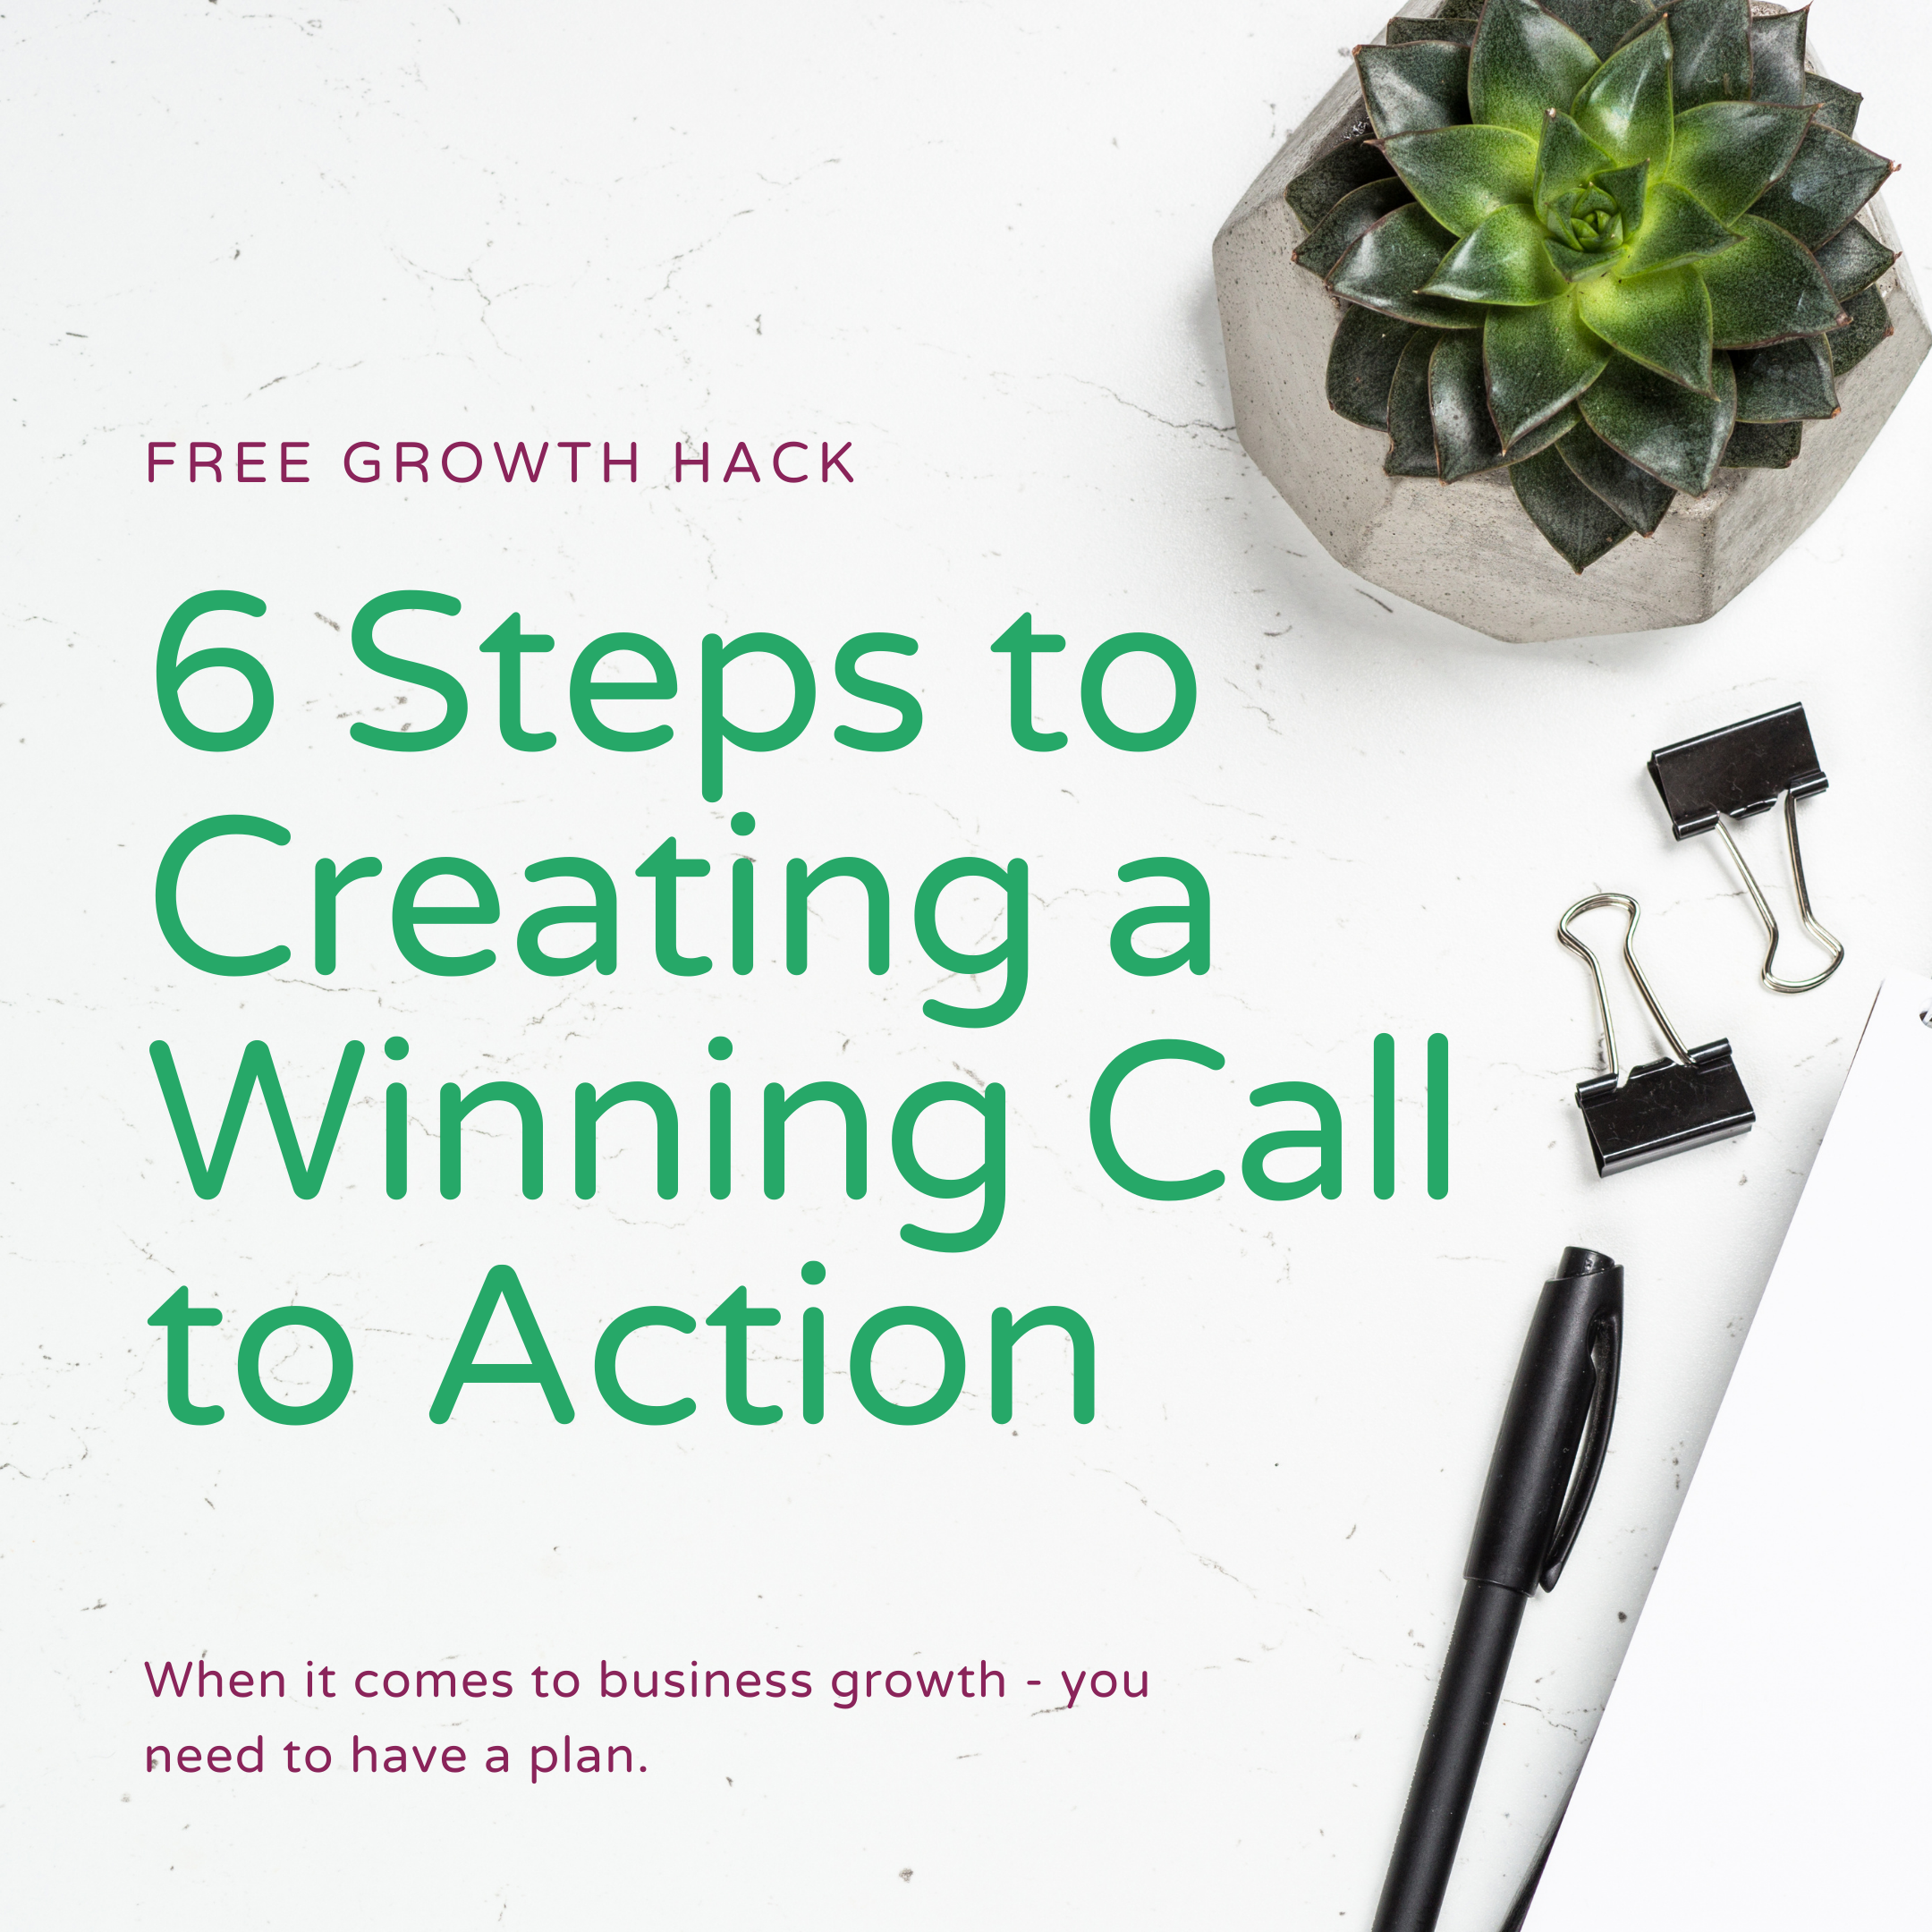 6 Steps to Creating a Winning Call to Action